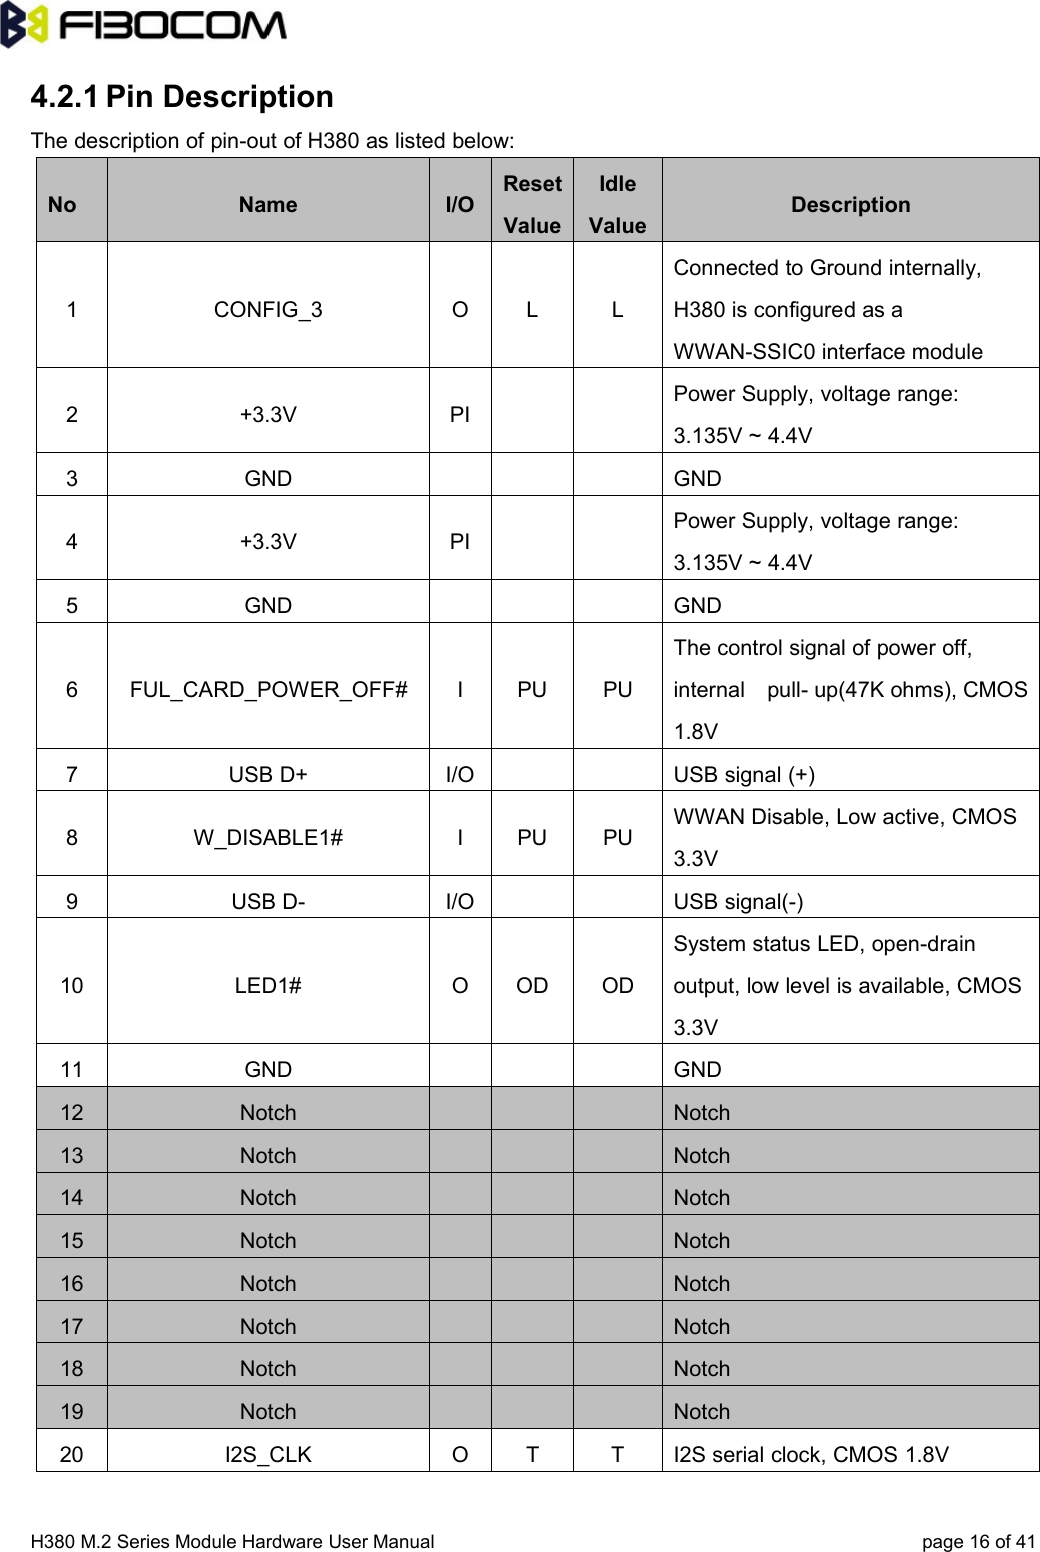 H380 M.2 Series Module Hardware User Manual page 16 of 414.2.1 Pin DescriptionThe description of pin-out of H380 as listed below:No Name I/OResetValueIdleValueDescription1 CONFIG_3 O L LConnected to Ground internally,H380 is configured as aWWAN-SSIC0 interface module2 +3.3V PIPower Supply, voltage range:3.135V ~ 4.4V3 GND GND4 +3.3V PIPower Supply, voltage range:3.135V ~ 4.4V5 GND GND6 FUL_CARD_POWER_OFF# I PU PUThe control signal of power off,internal pull- up(47K ohms), CMOS1.8V7 USB D+ I/O USB signal (+)8 W_DISABLE1# I PU PUWWAN Disable, Low active, CMOS3.3V9 USB D- I/O USB signal(-)10 LED1# O OD ODSystem status LED, open-drainoutput, low level is available, CMOS3.3V11 GND GND12 Notch Notch13 Notch Notch14 Notch Notch15 Notch Notch16 Notch Notch17 Notch Notch18 Notch Notch19 Notch Notch20 I2S_CLK O T T I2S serial clock, CMOS 1.8V